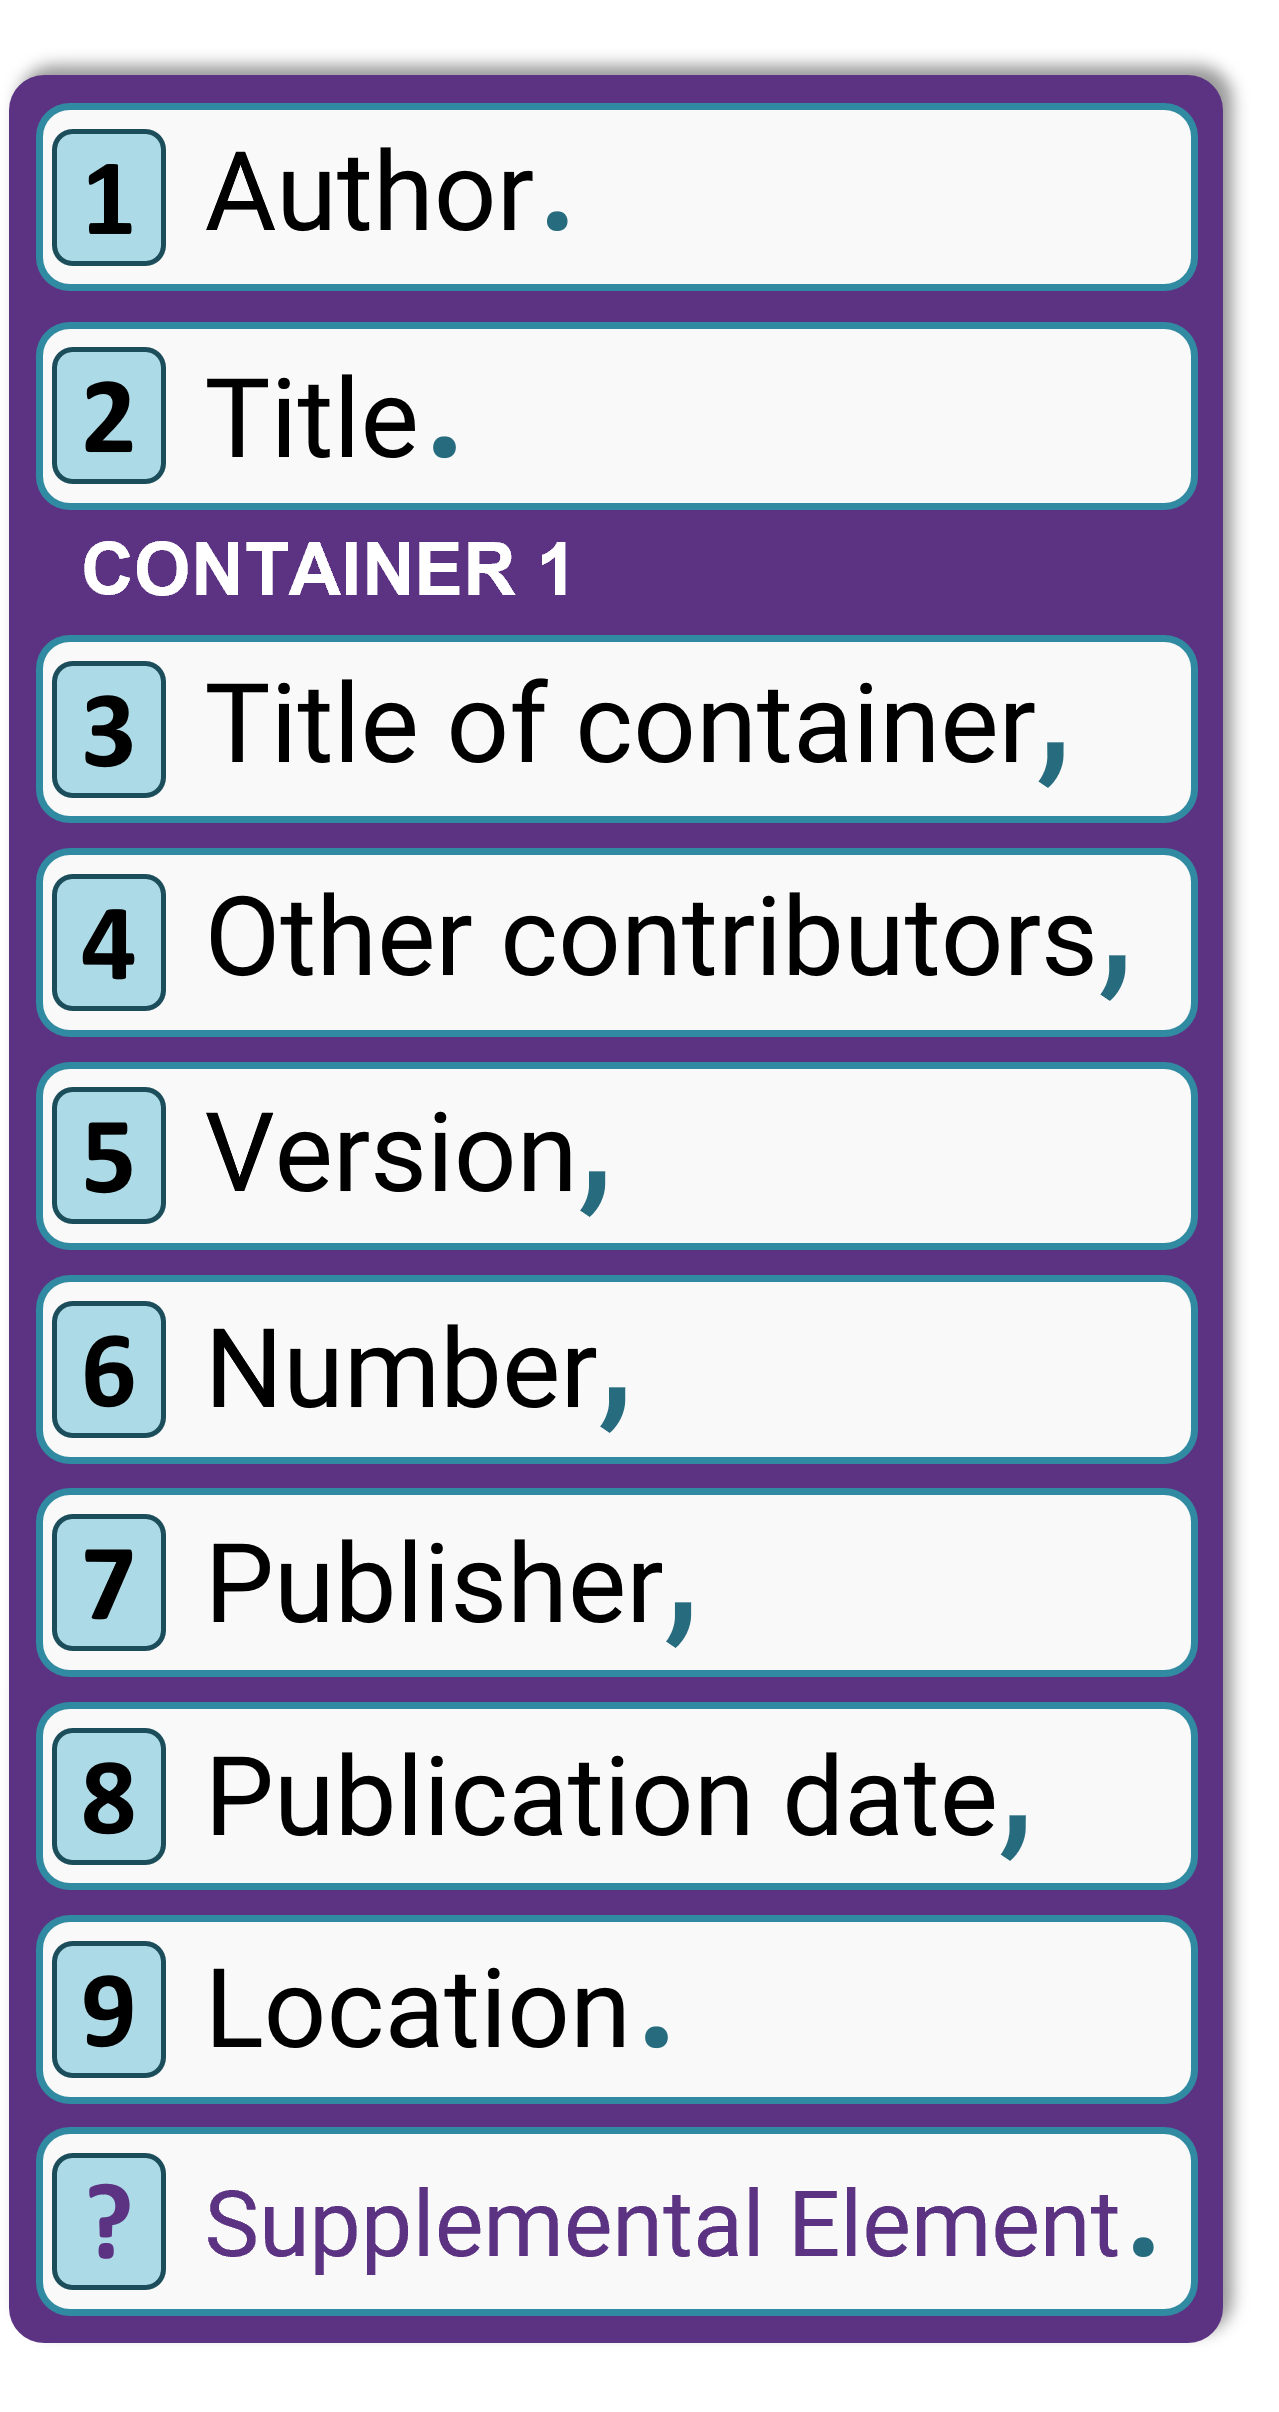 Author. Title. Title of container, other contributors, version, number, publisher, publication date, location. optional Supplemental element.